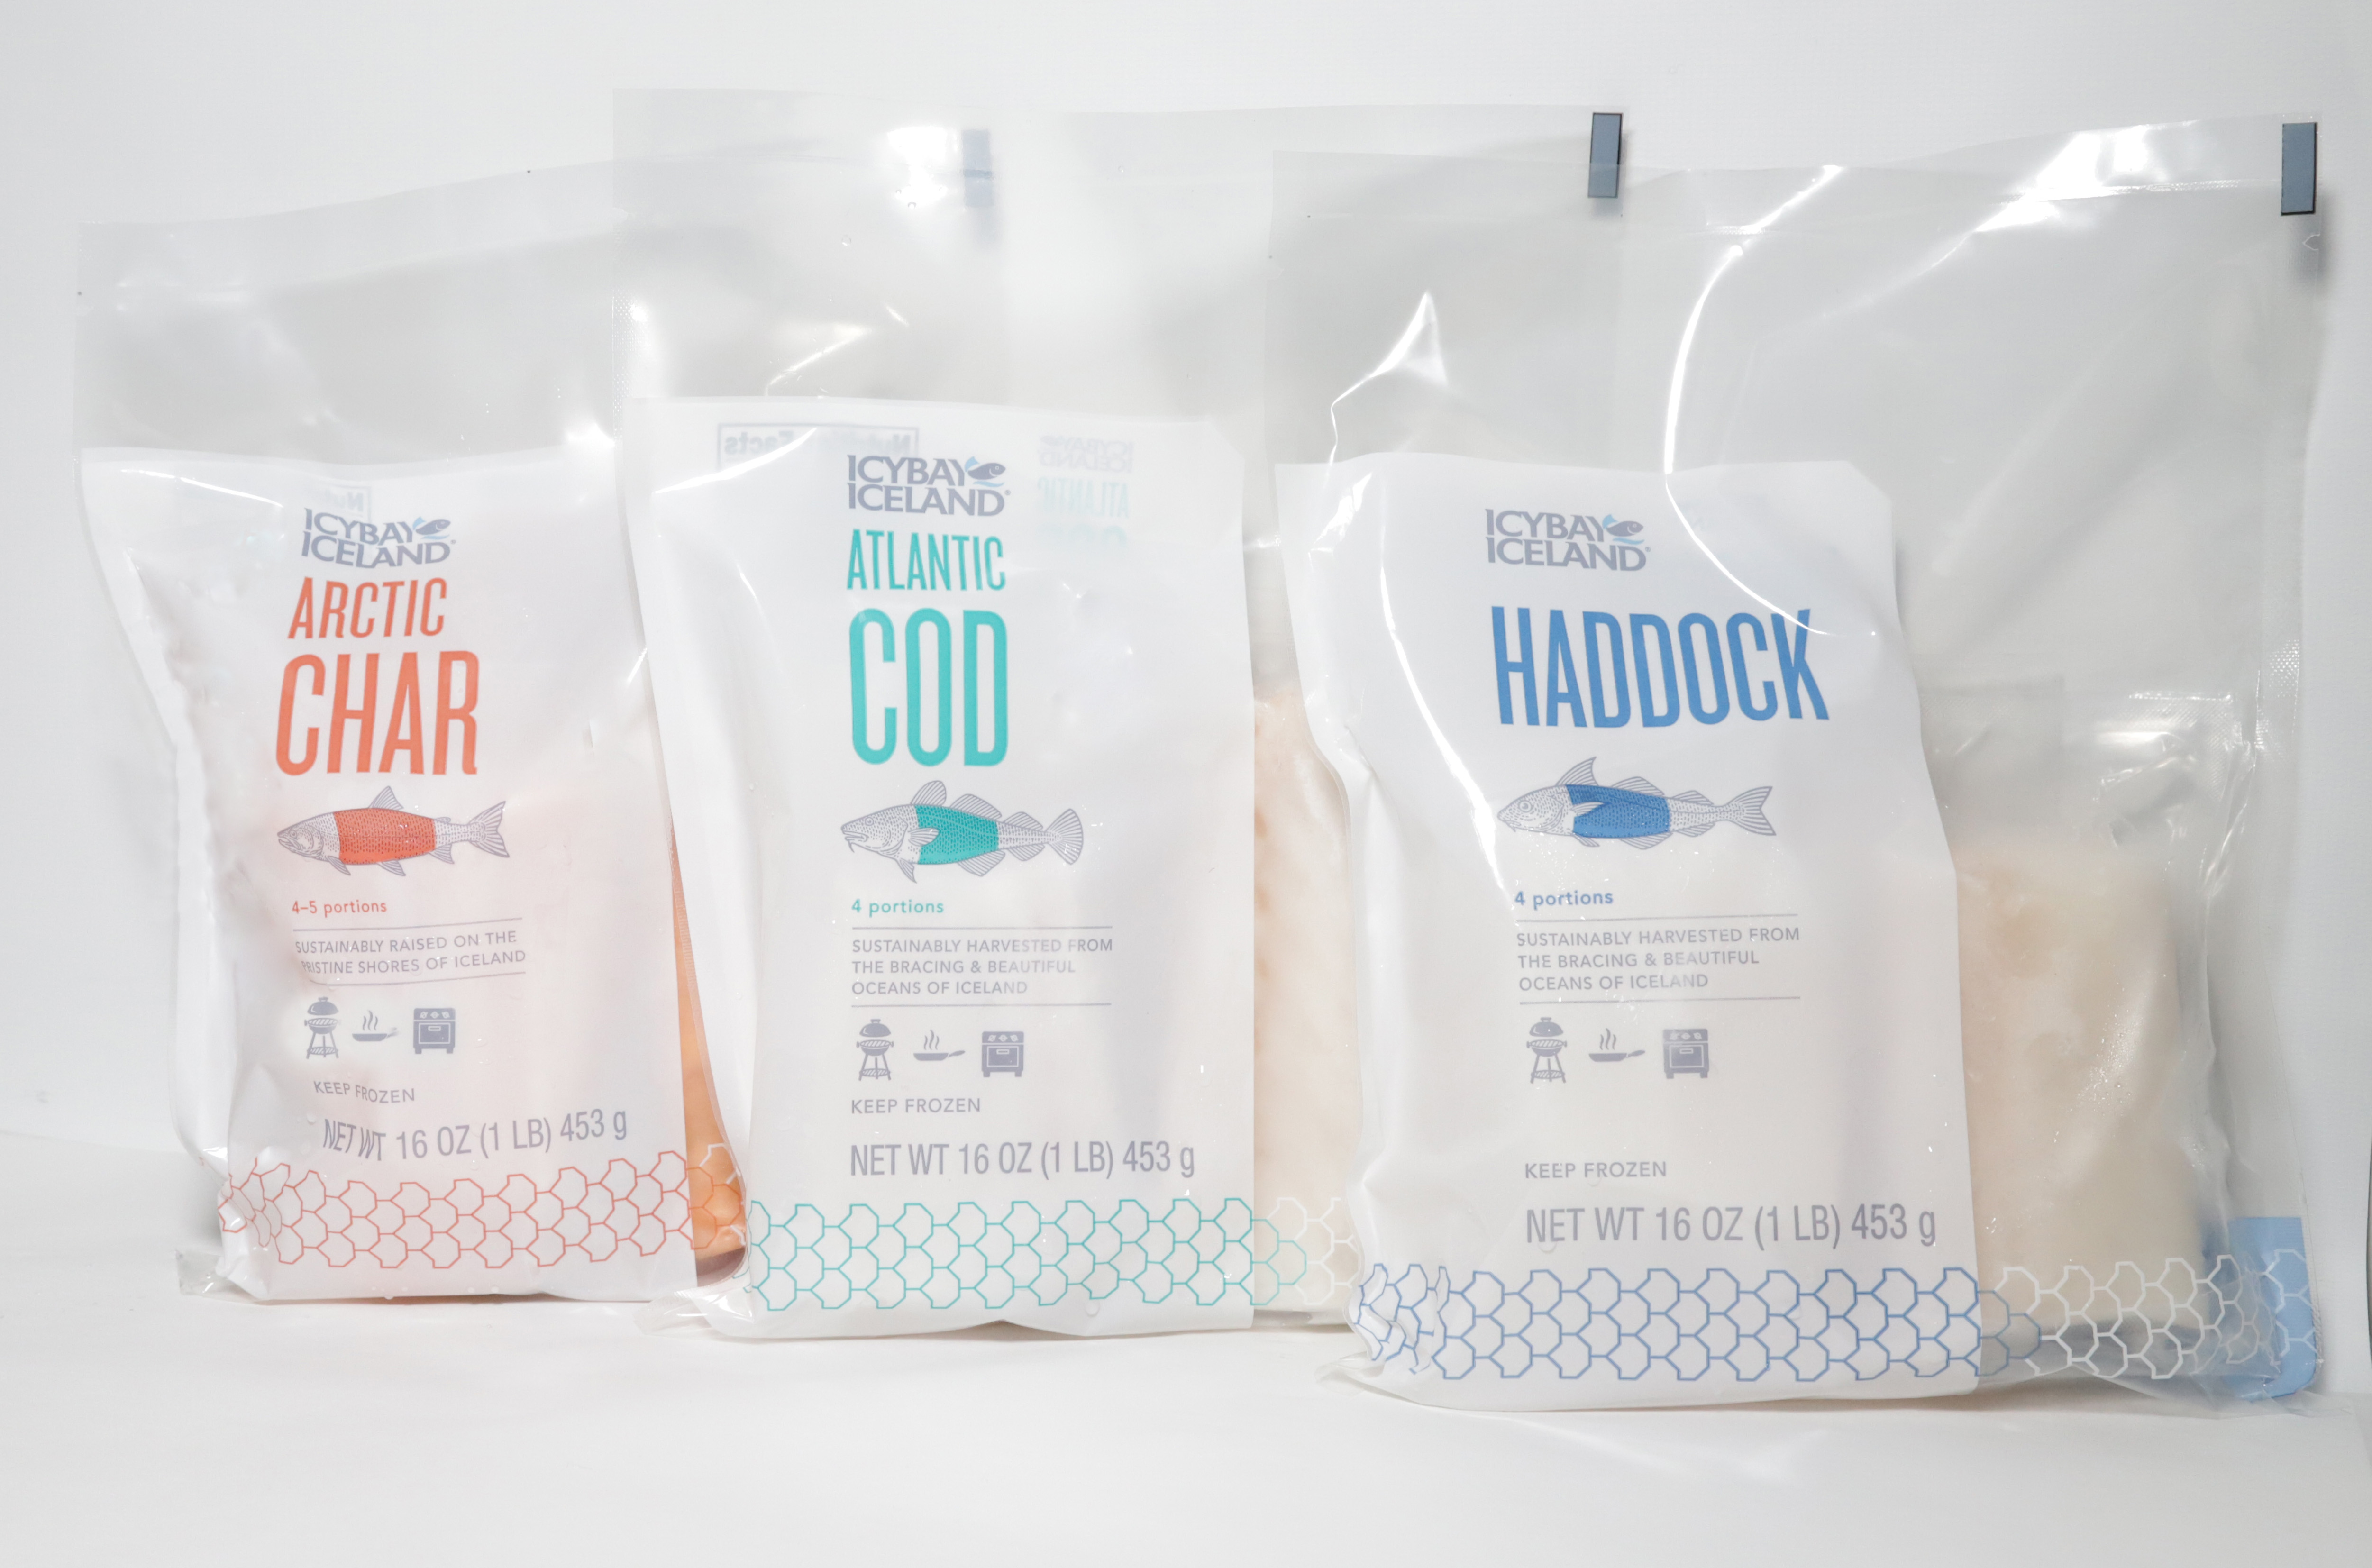 Slade Gorton Launches ICYBAY Iceland Retail Bag Line at Boston Seafood Show